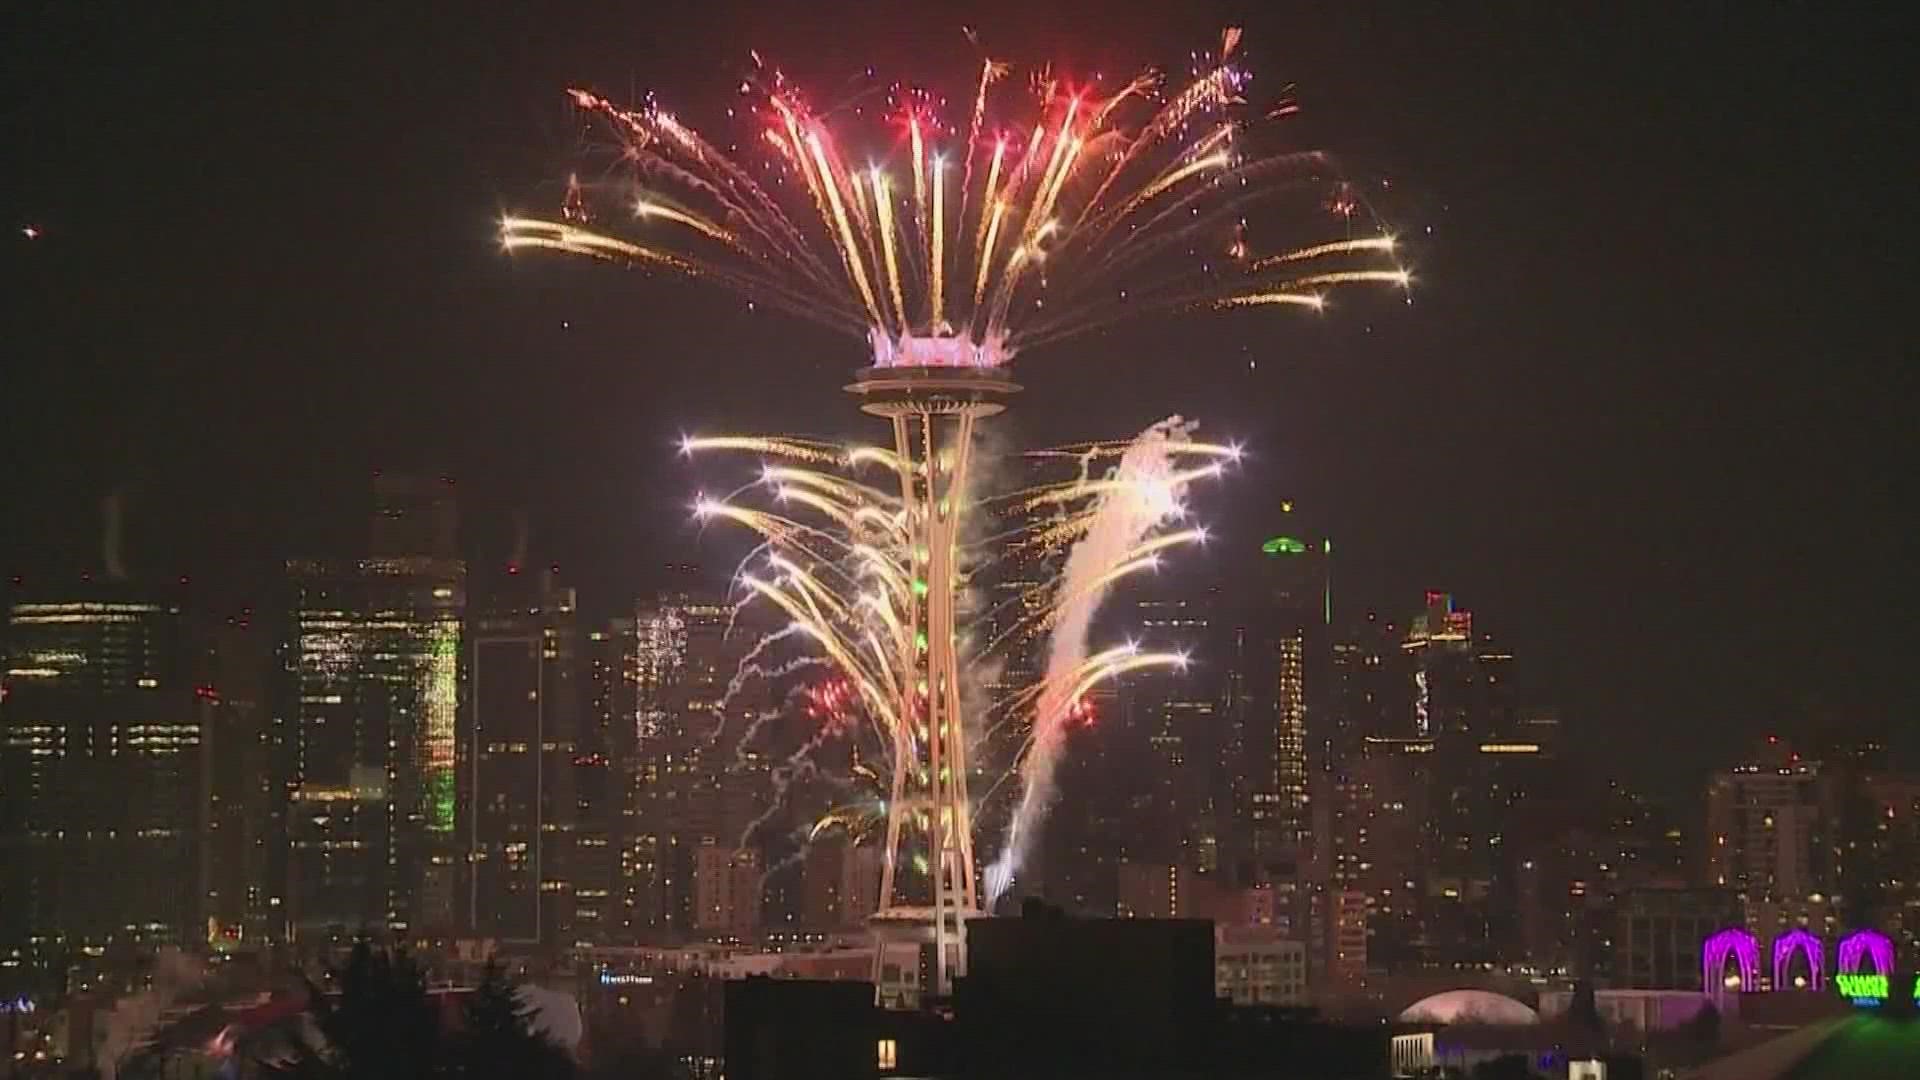 The event will be the first in-person New Year's Eve celebration at the Space Needle since the beginning of the pandemic.